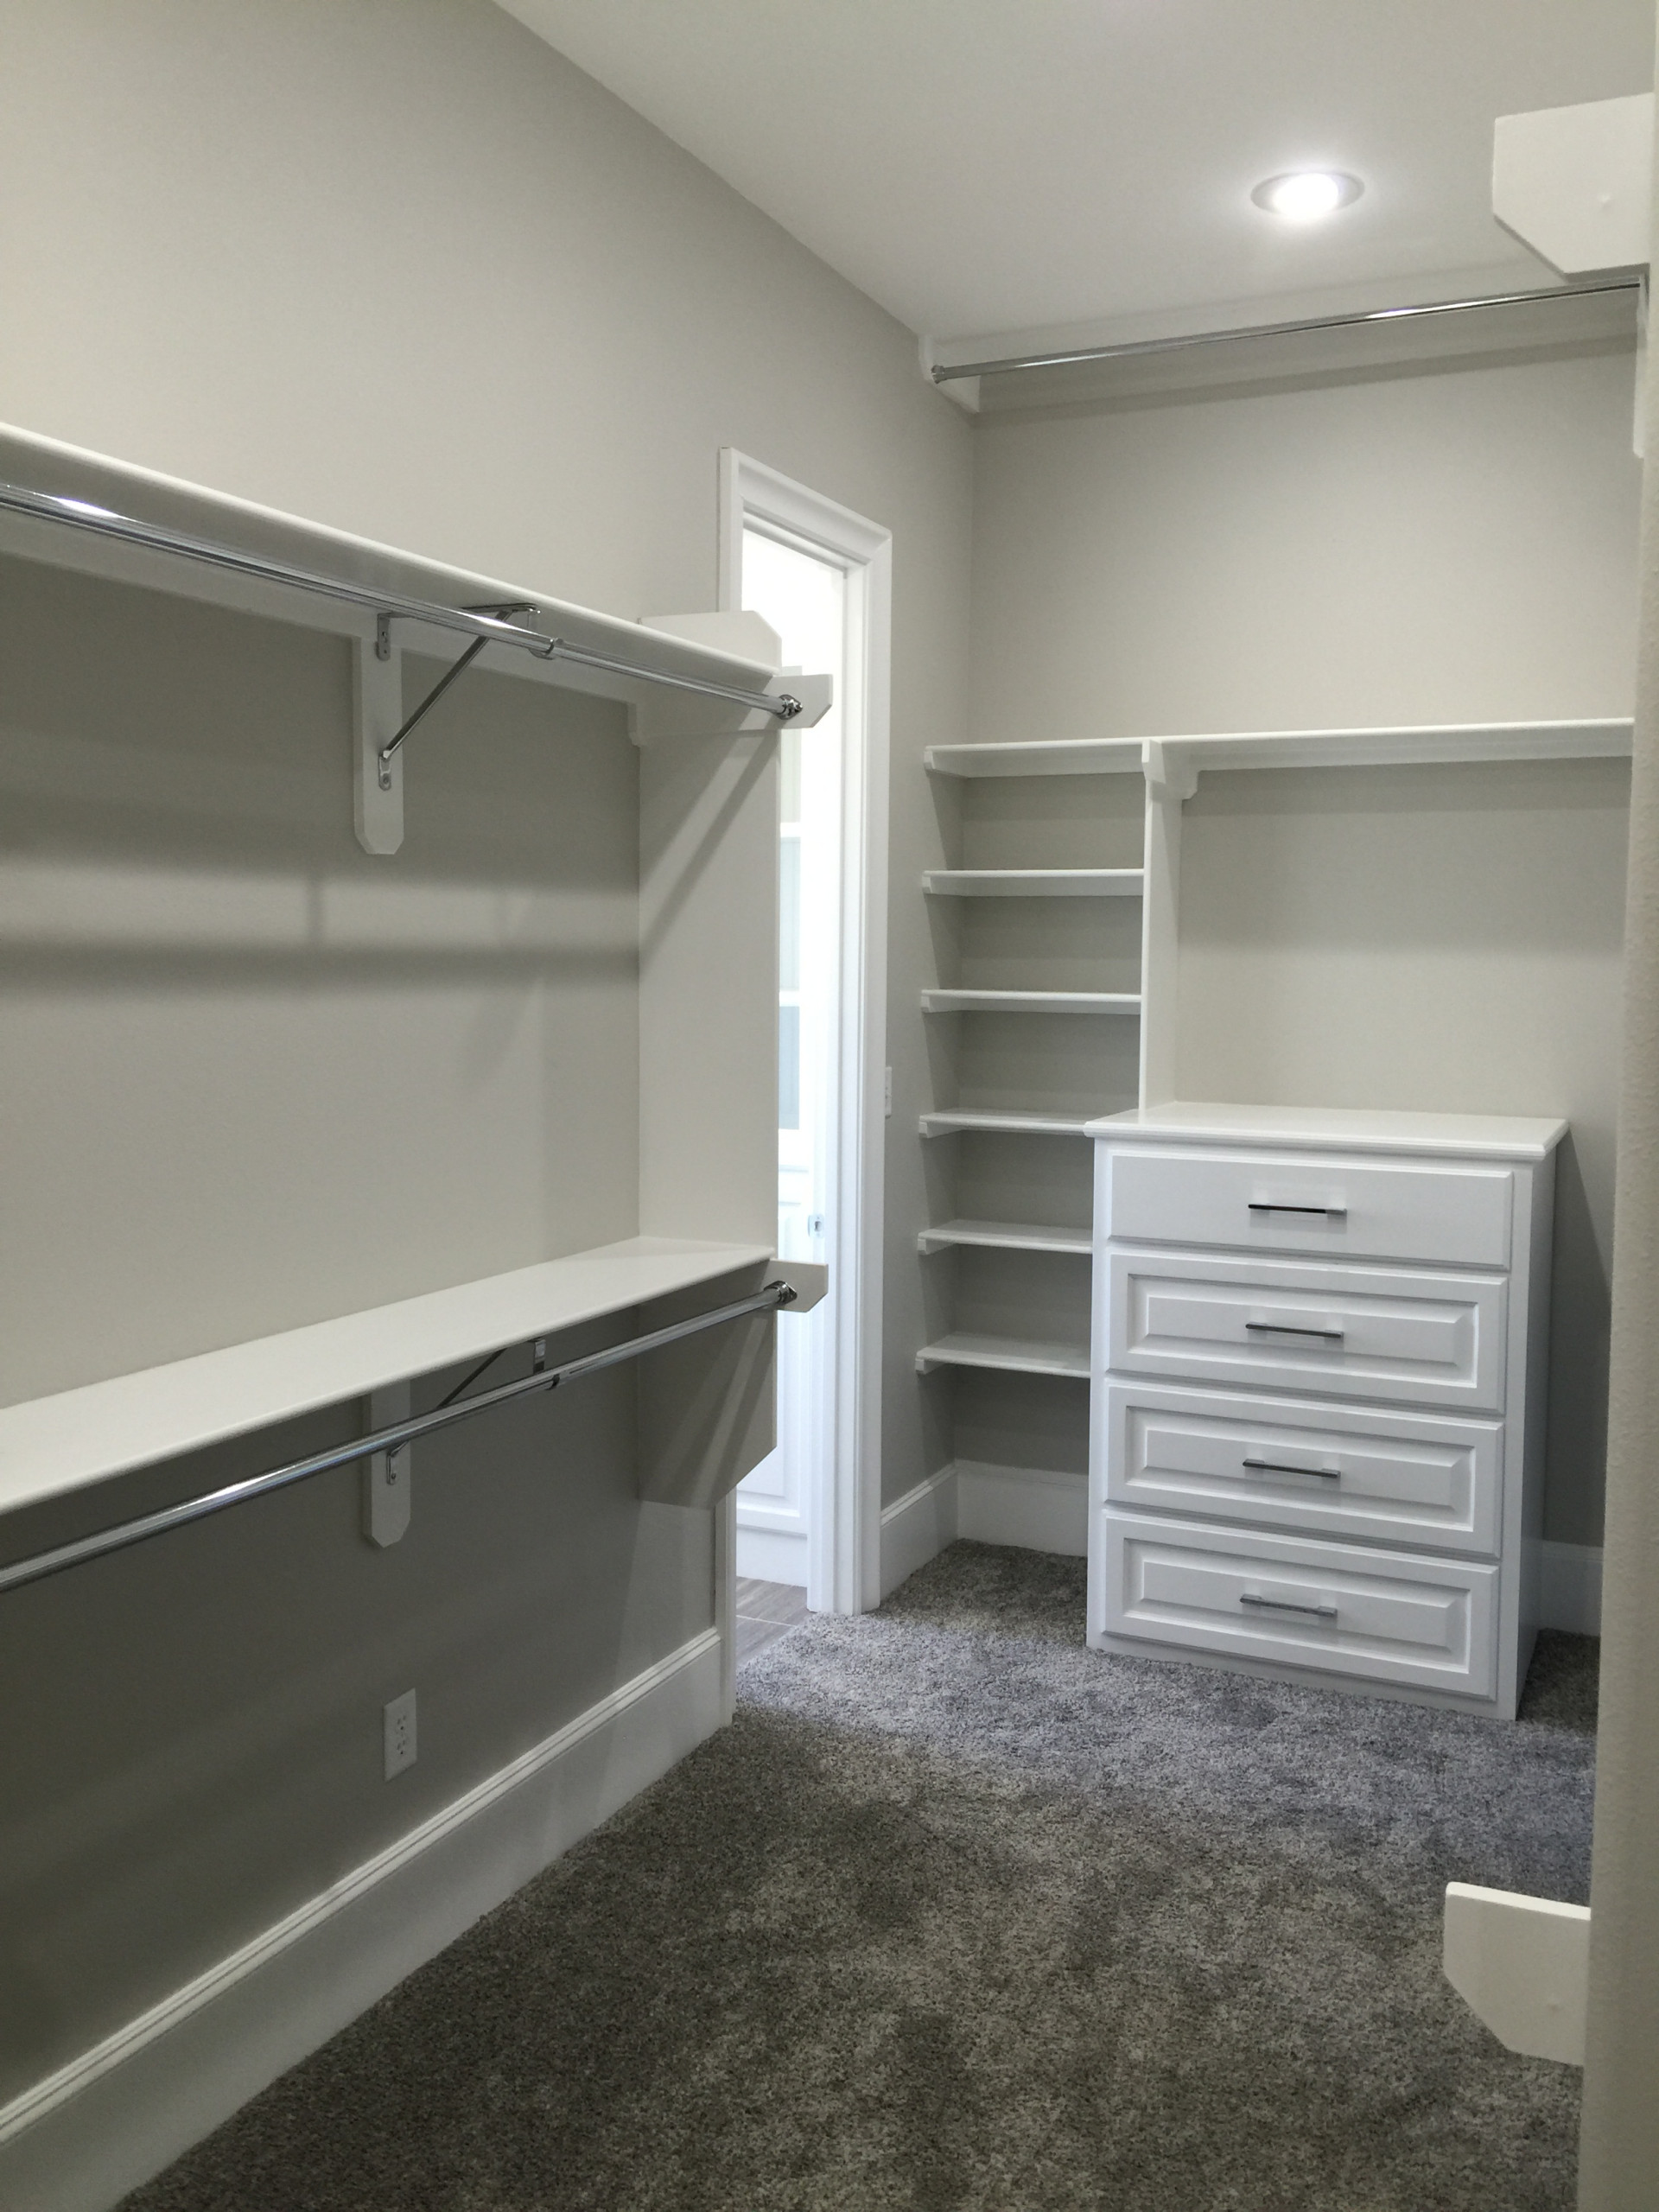 https://st.hzcdn.com/simgs/pictures/closets/project-gallery-toby-hartline-custom-homes-and-remodeling-img~d3e1ae12086c16ed_14-1777-1-c851163.jpg